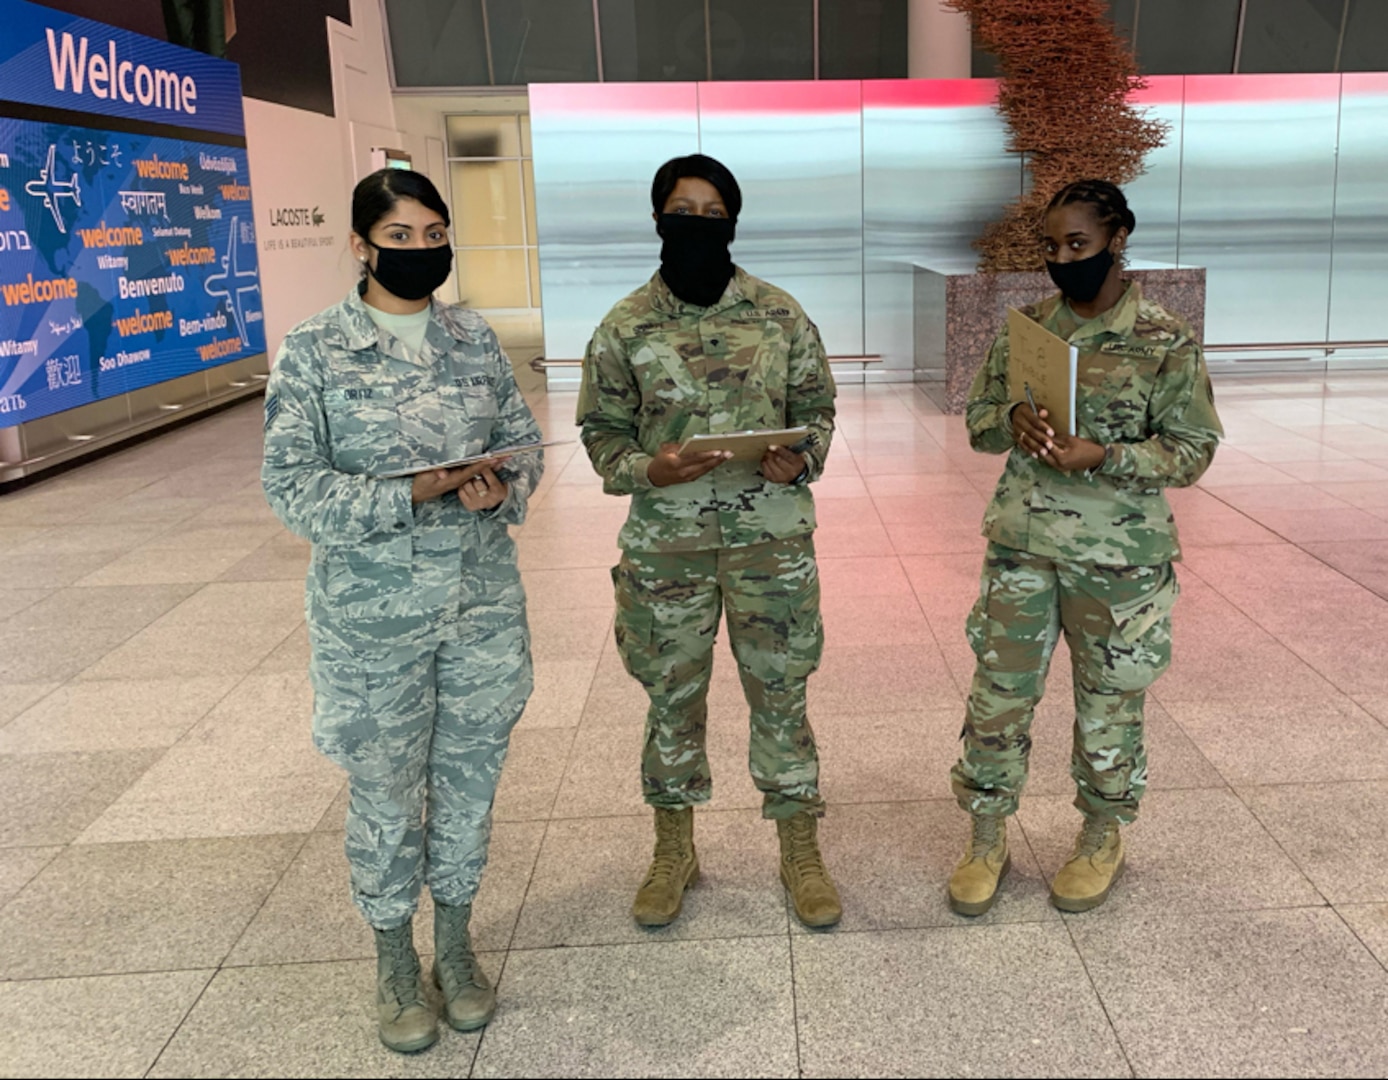 Members of the New York National Guard help state Department of Health officials screen travelers at JFK Airport in New York City Oct. 16. 2020. Travelers arriving from states with significant community spread are advised to quarantine for 14 days as a precaution.